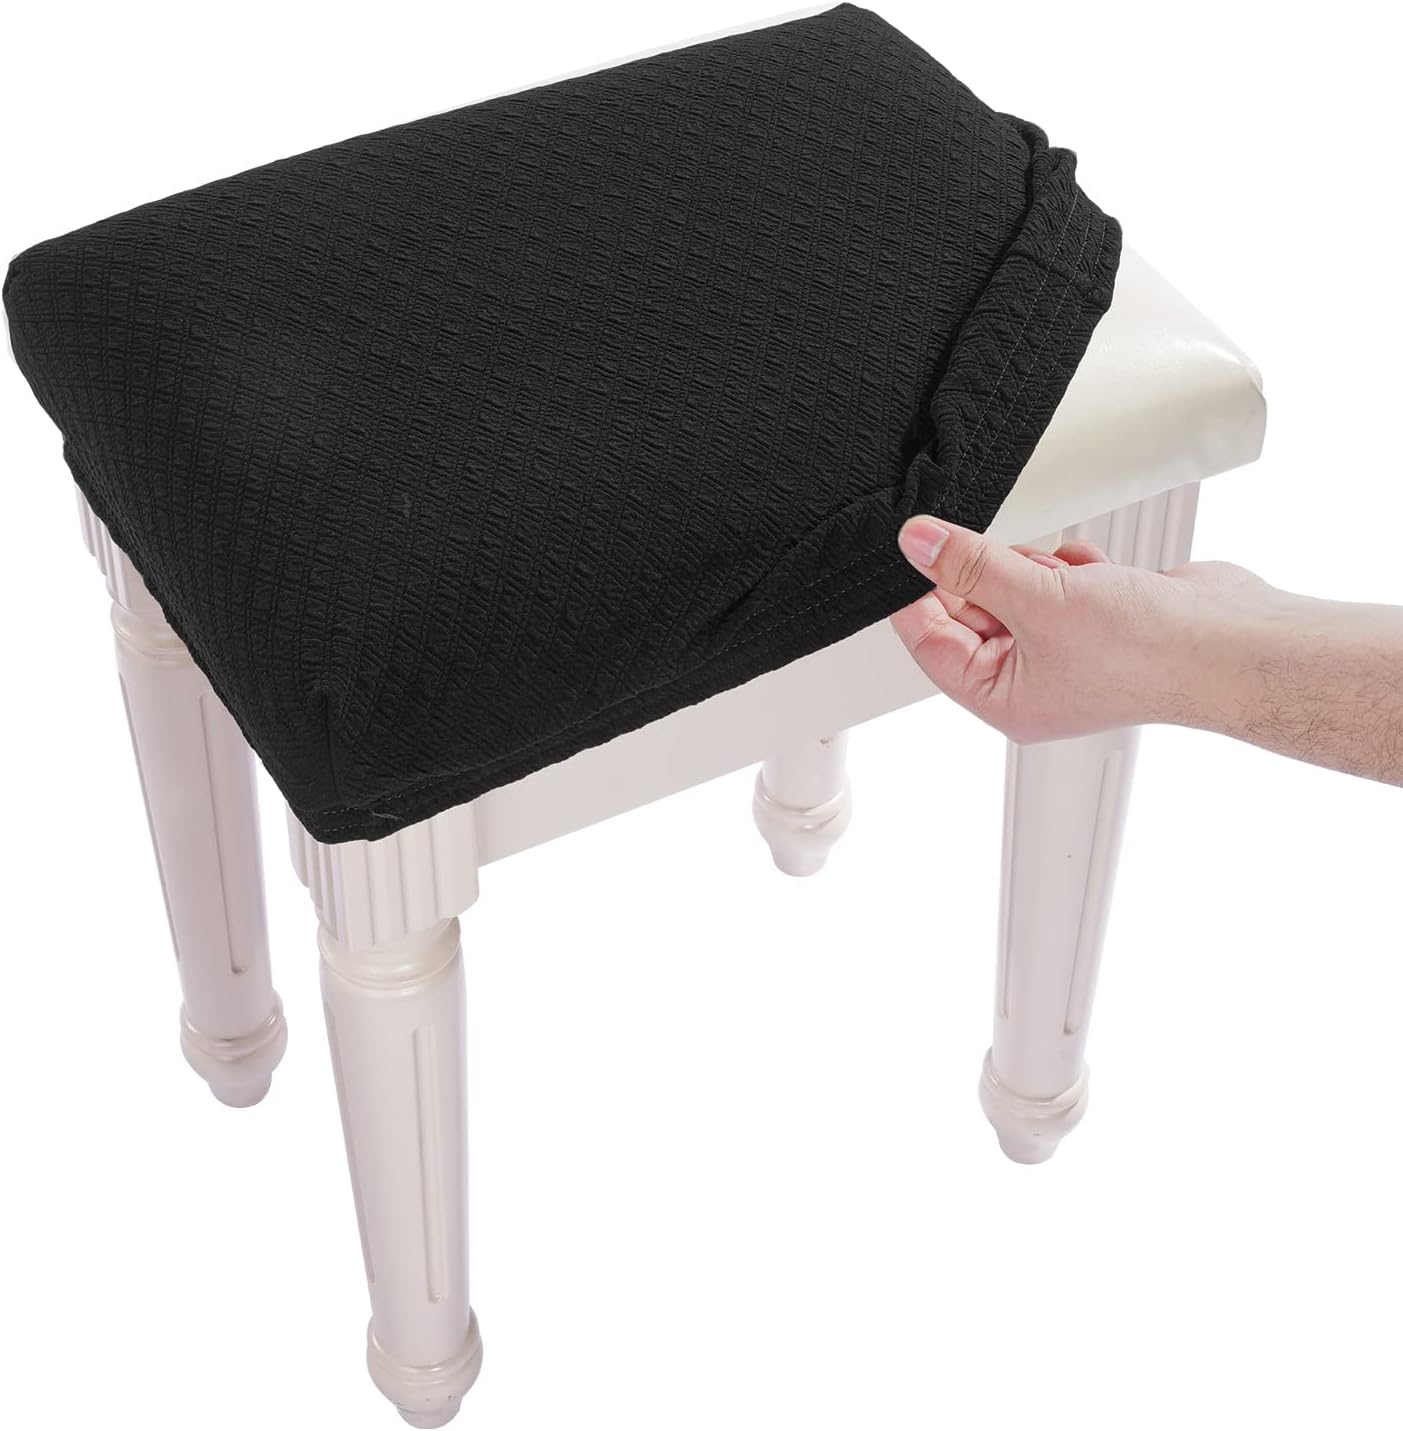 BUYUE Luxury Vanity Bench Stool Cover, (15"- 20") L x (11.8"- 15.7") W Rectangle Small Bench Stretch Jacquard Washable Slipcover (XS, Black)